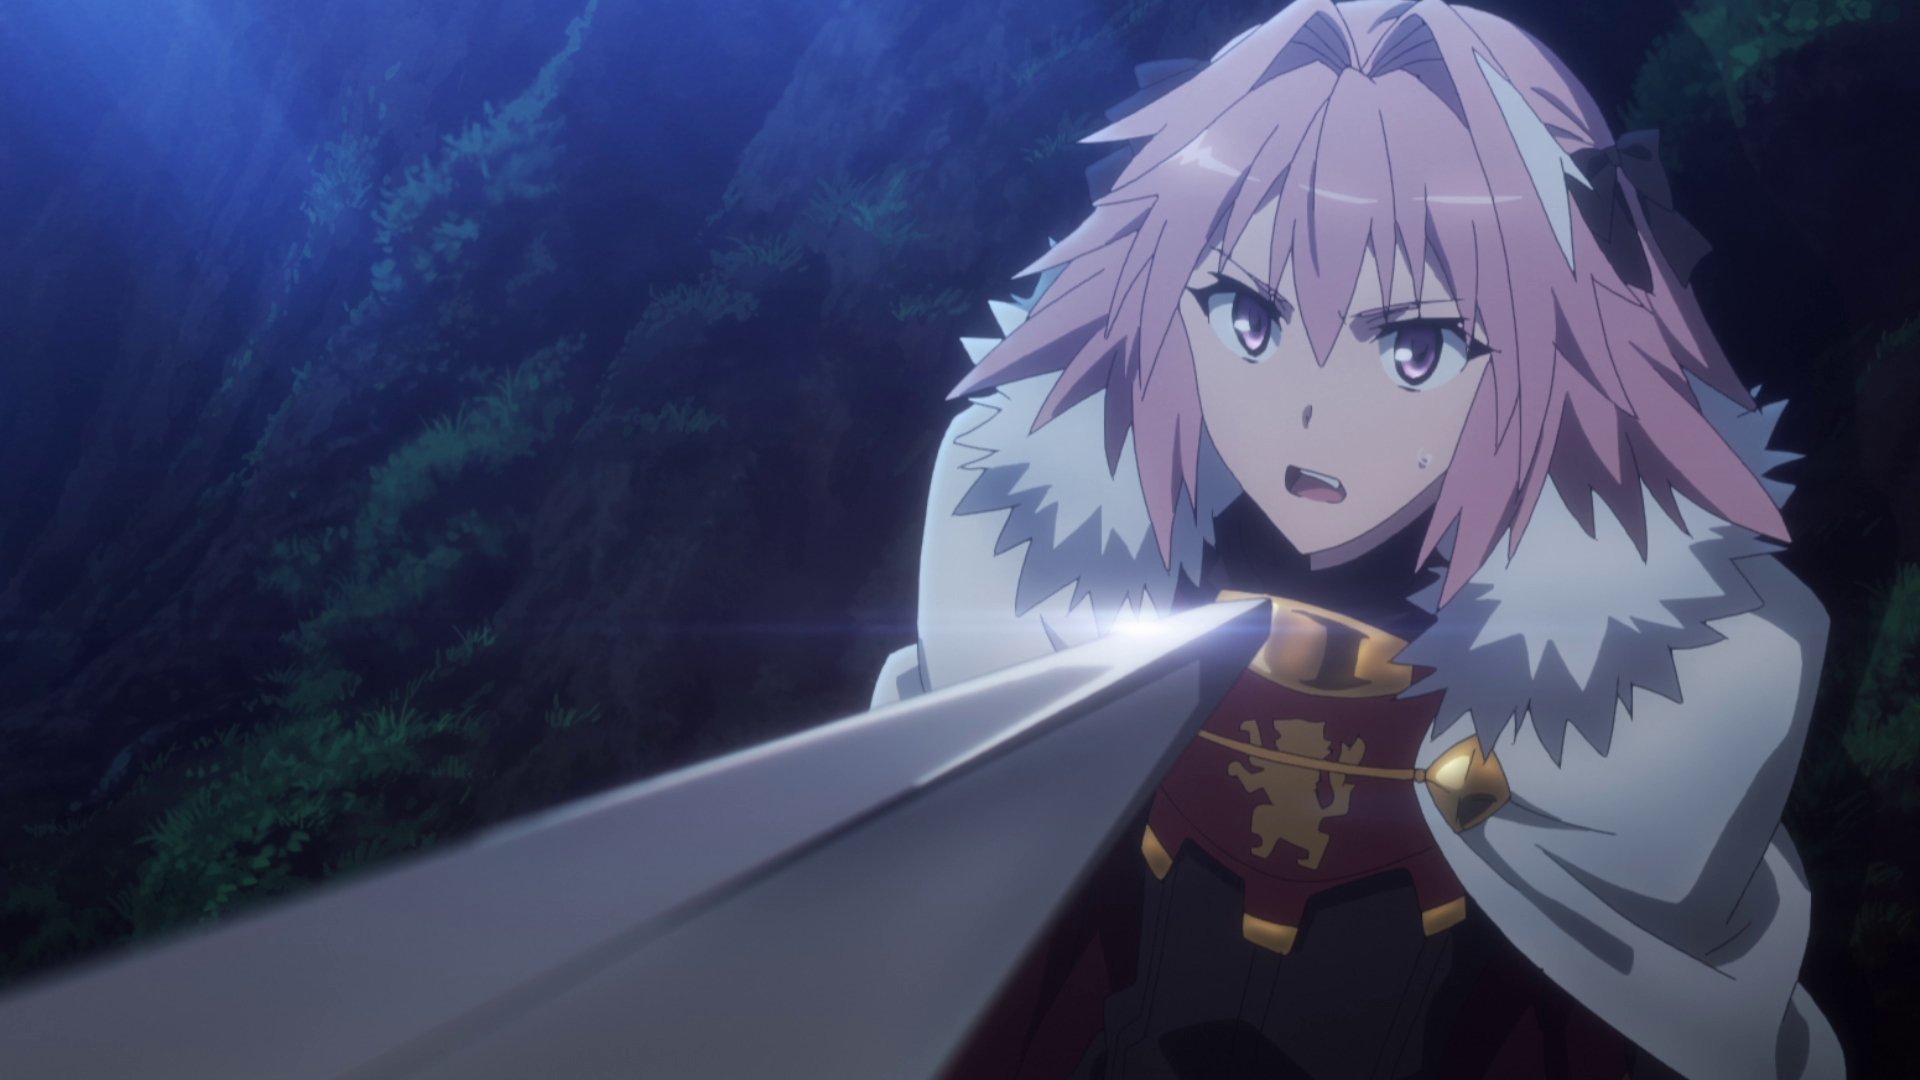 Image for Fate/Apocrypha Part 1. Uploaded by Jitendar Canth. 